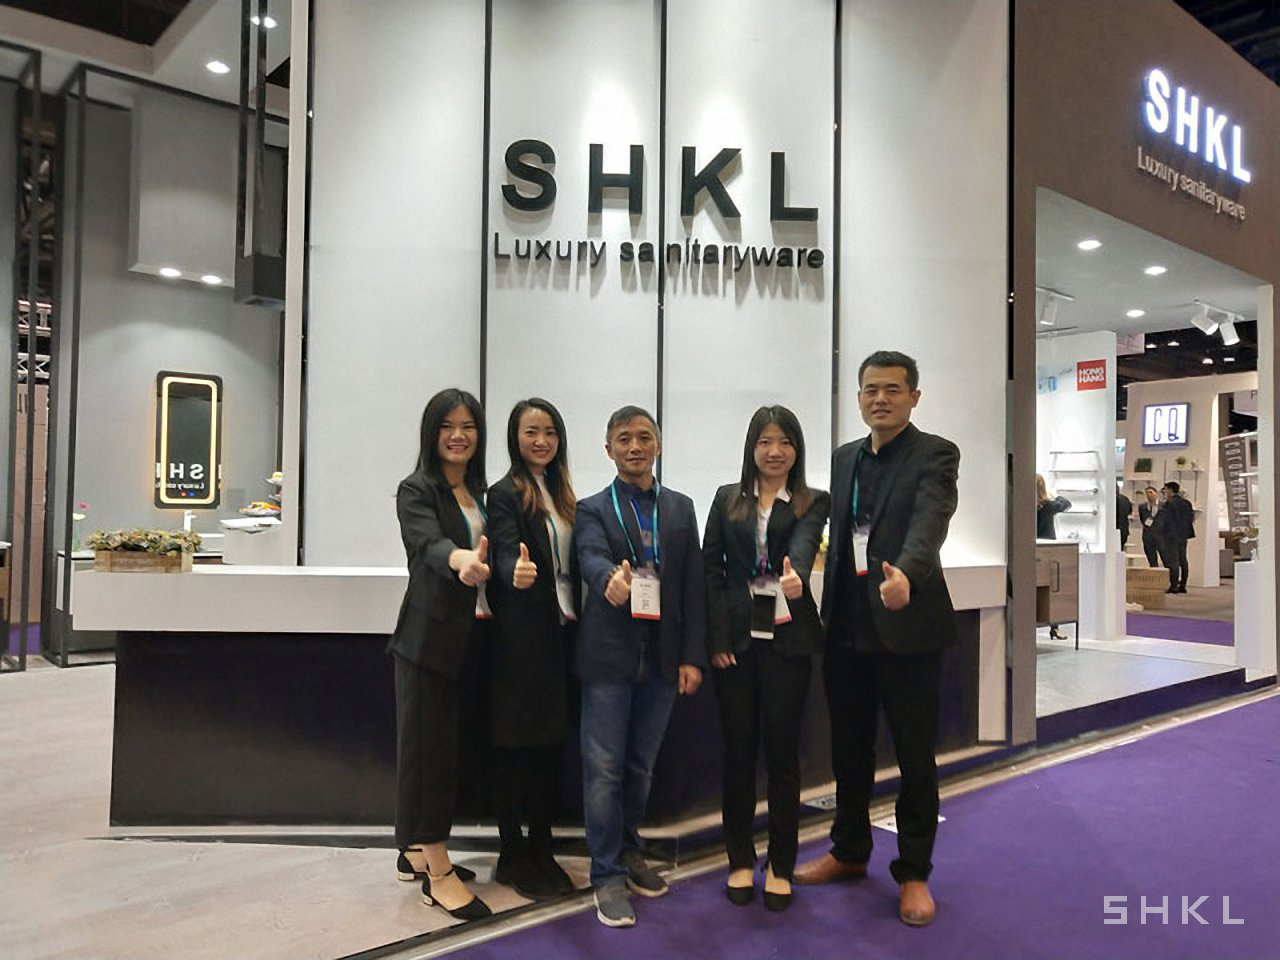 KBIS 2018, SHKL attended KBIS the 2nd time, leading the trend of bathroom vanities 2